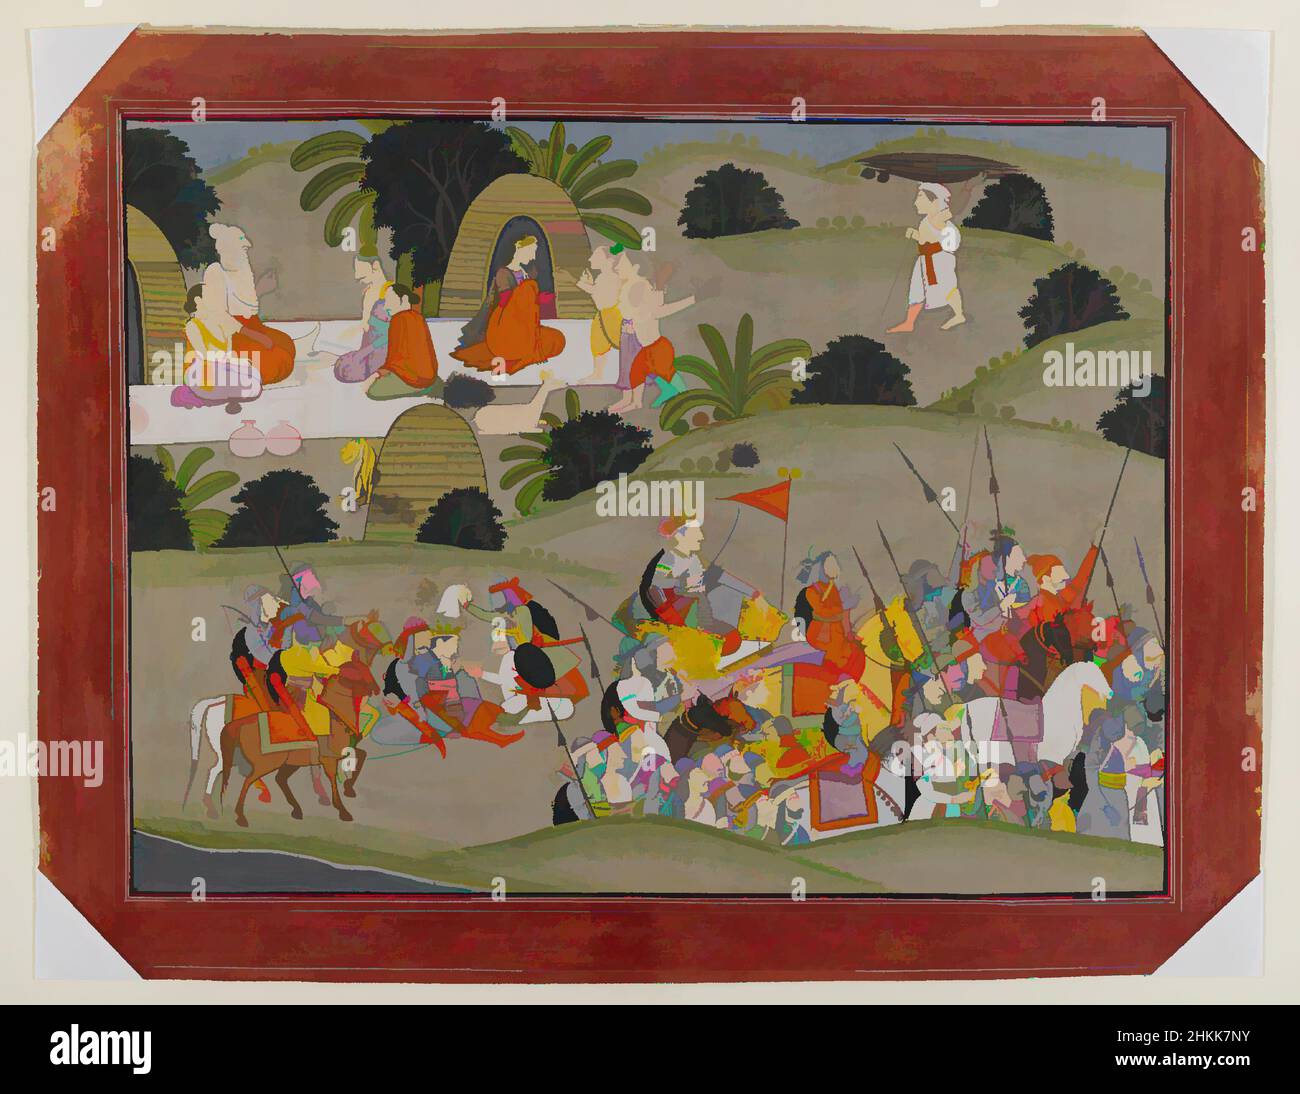 Art inspired by Battle between Lava and Rama's brother, Shatrughna, near the hermitage of Valmiki, Page from a Dispersed Ramayana Series, Indian, Opaque watercolor and gold on paper, Punjab Hills, India, ca. 1820, sheet: 13 1/4 x 17 1/4 in., 33.7 x 43.8 cm, Animals, Chariot, Eastern, Classic works modernized by Artotop with a splash of modernity. Shapes, color and value, eye-catching visual impact on art. Emotions through freedom of artworks in a contemporary way. A timeless message pursuing a wildly creative new direction. Artists turning to the digital medium and creating the Artotop NFT Stock Photo